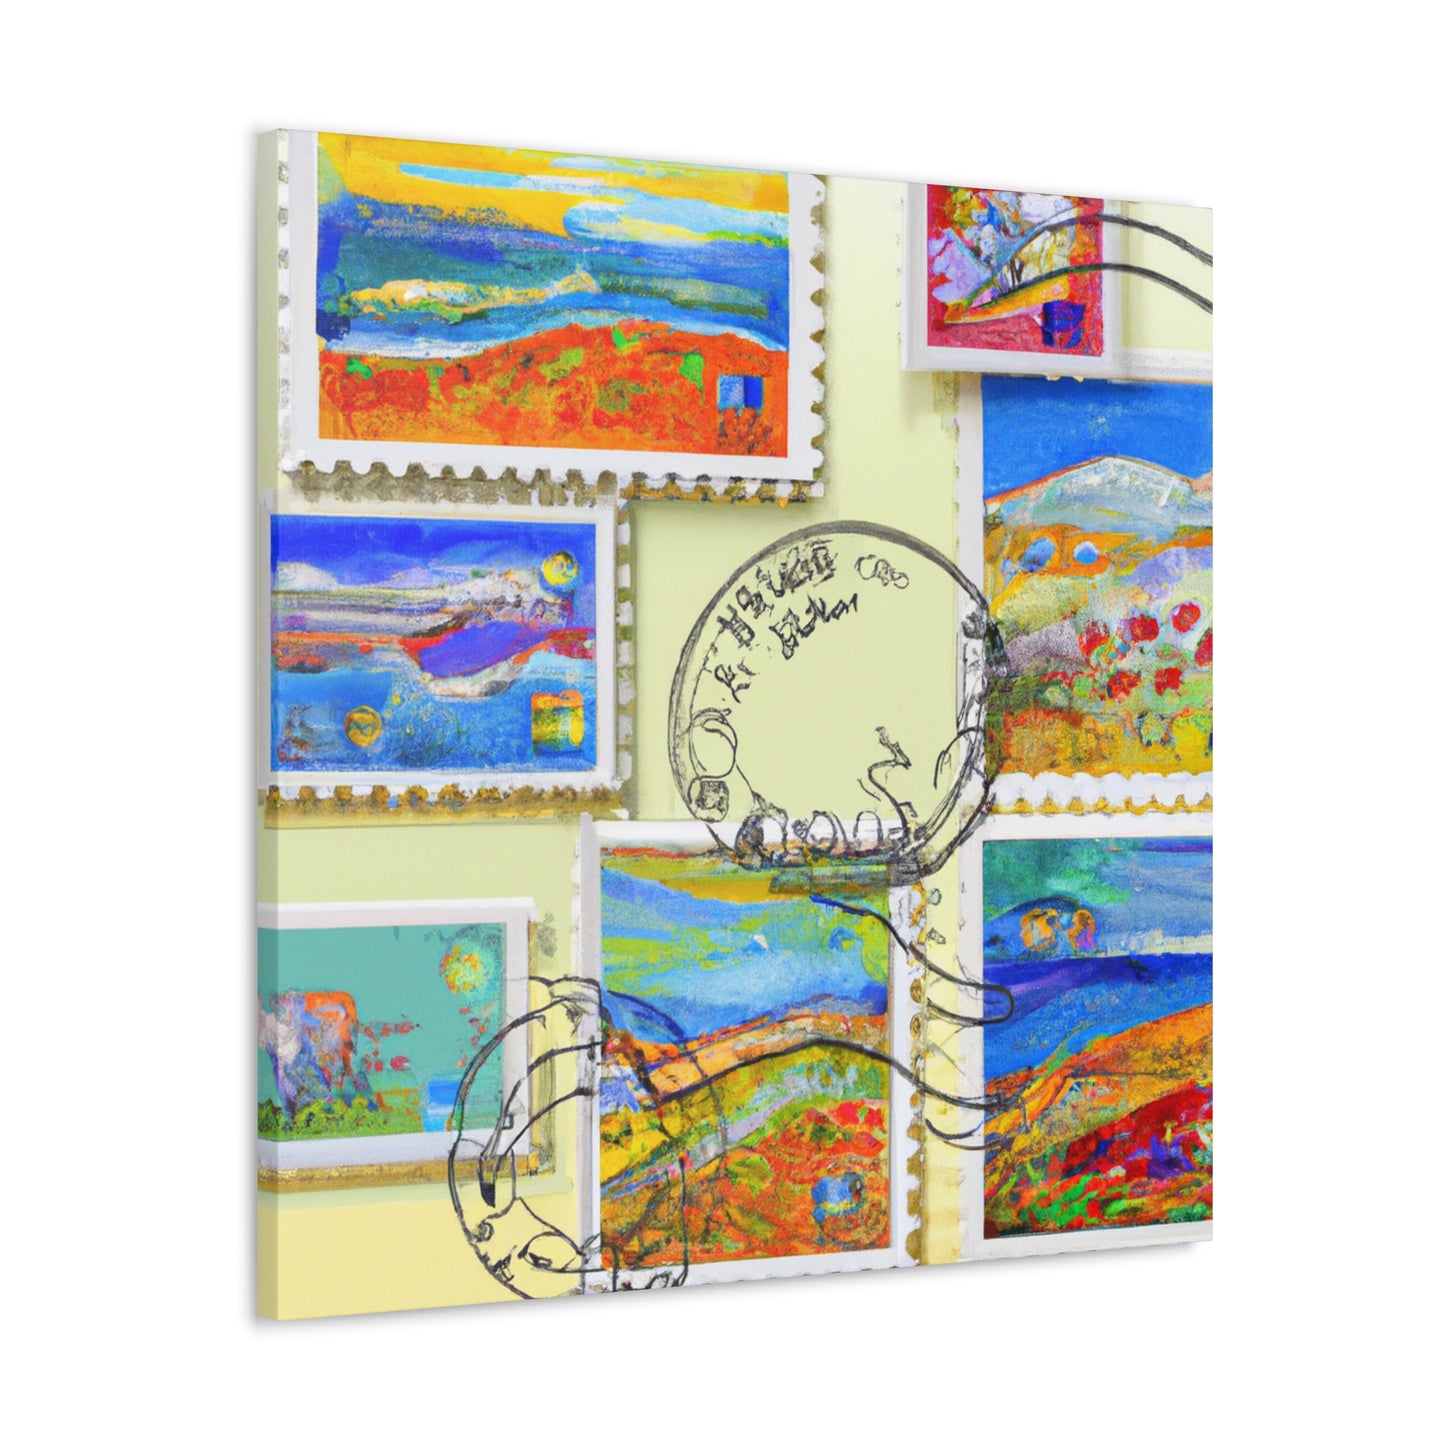 "Stamp Mosaic: A Worldwide Tour of Colorful Cultures" - Postage Stamp Collector Canvas Wall Art